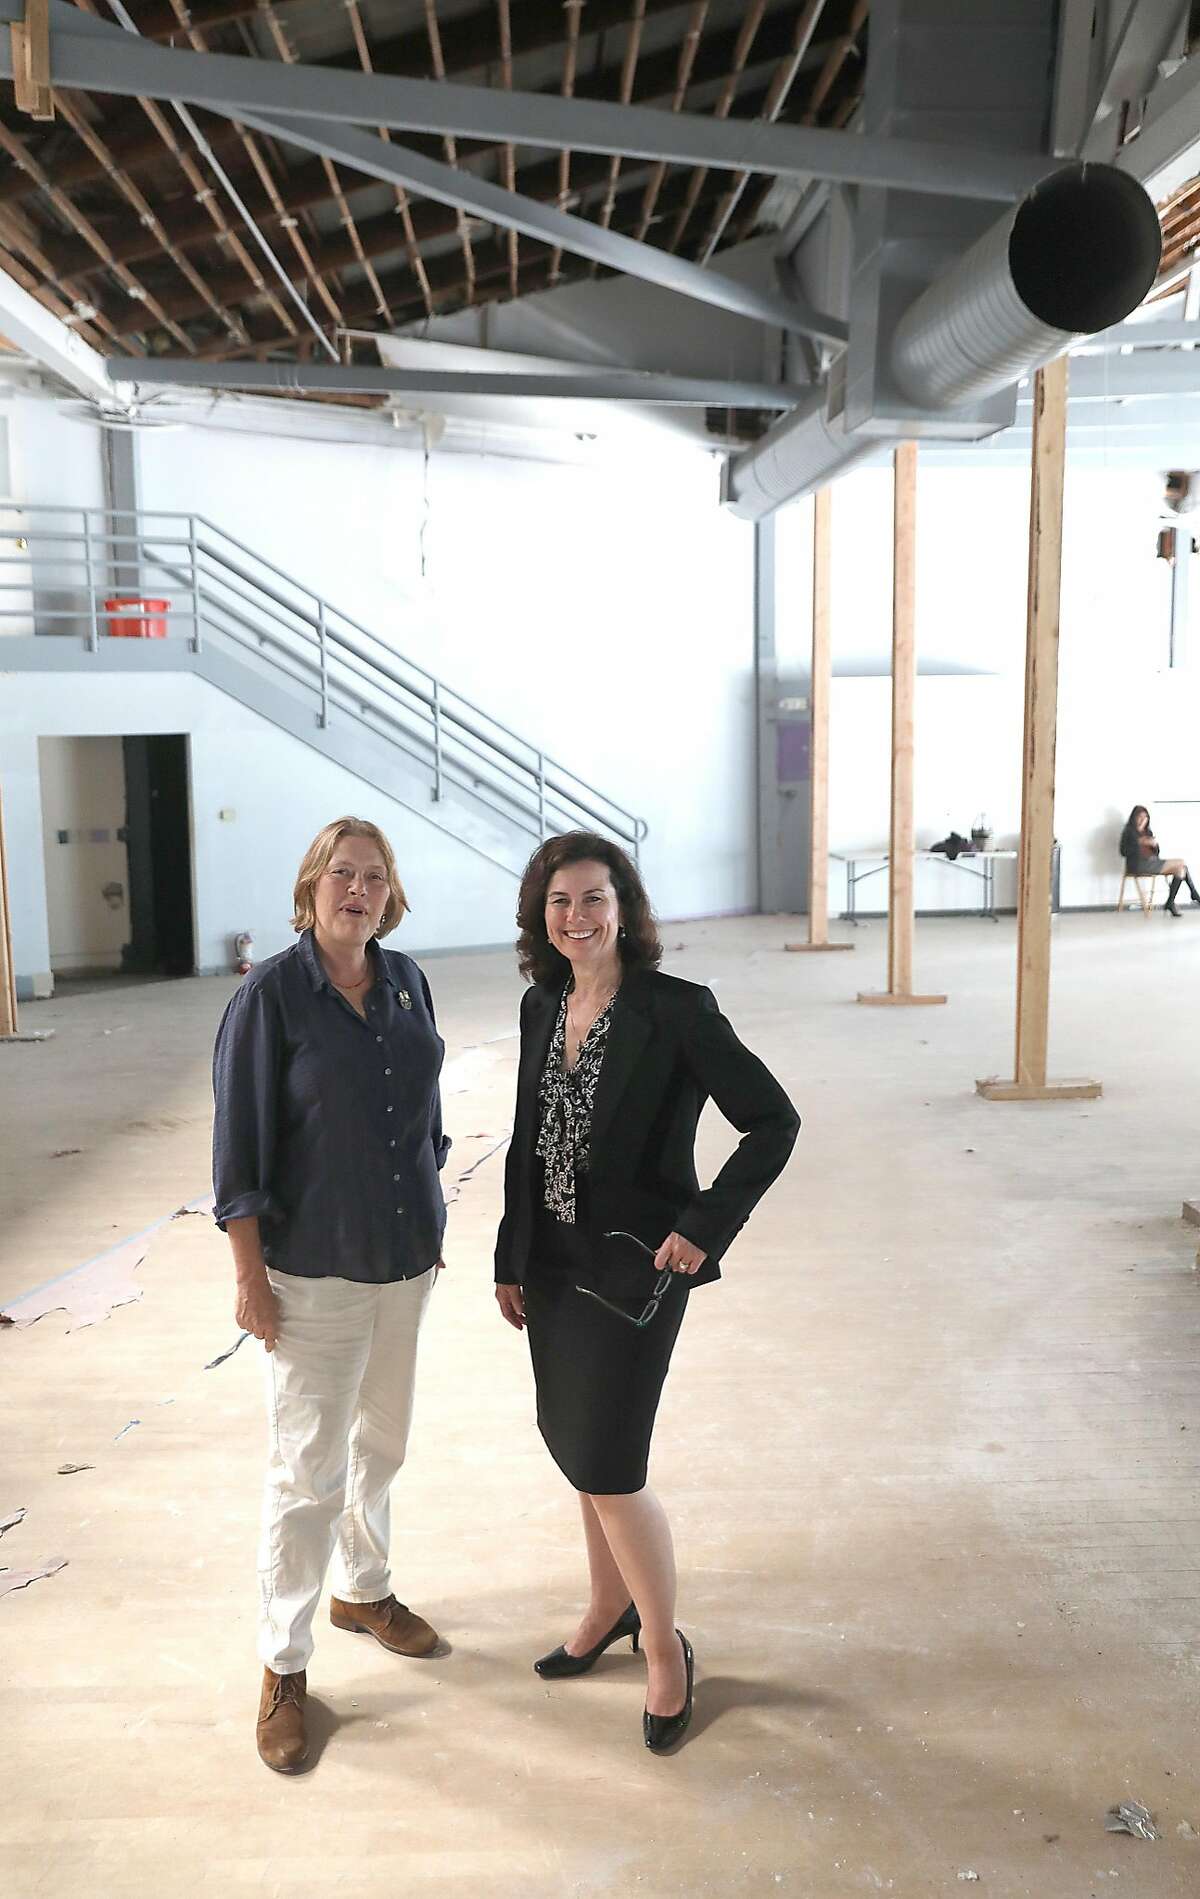 Smuin managing director Lori Laqua (left) and Smuin artistic director Celia Fushille (right) show their new headquarters and dance studio on Tuesday, Aug. 7, 2018 in San Francisco, Calif. Smuin Ballet is celebrating its upcoming 25th anniversary and buying the old Metronome Ballroom on Potrero Hill to convert into its headquarters and dance studio.